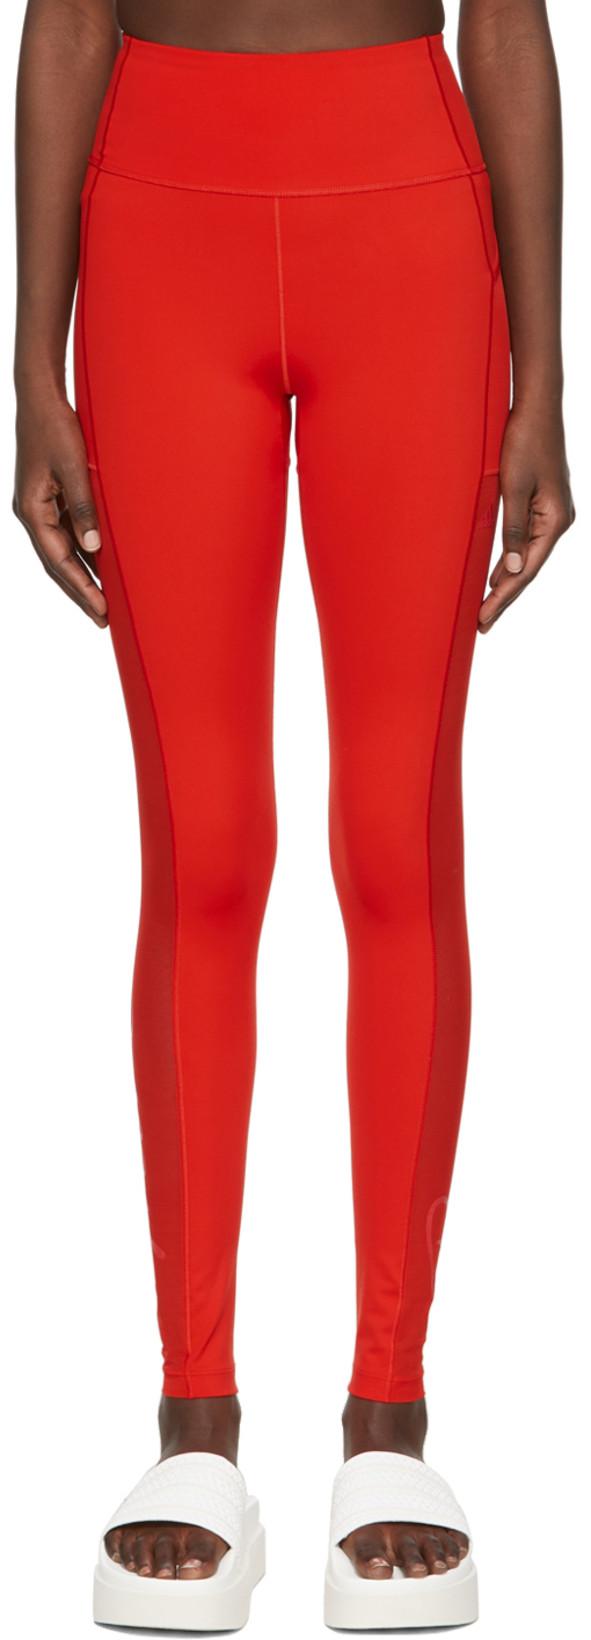 Red Recycled Polyester Leggings by ADIDAS X IVY PARK